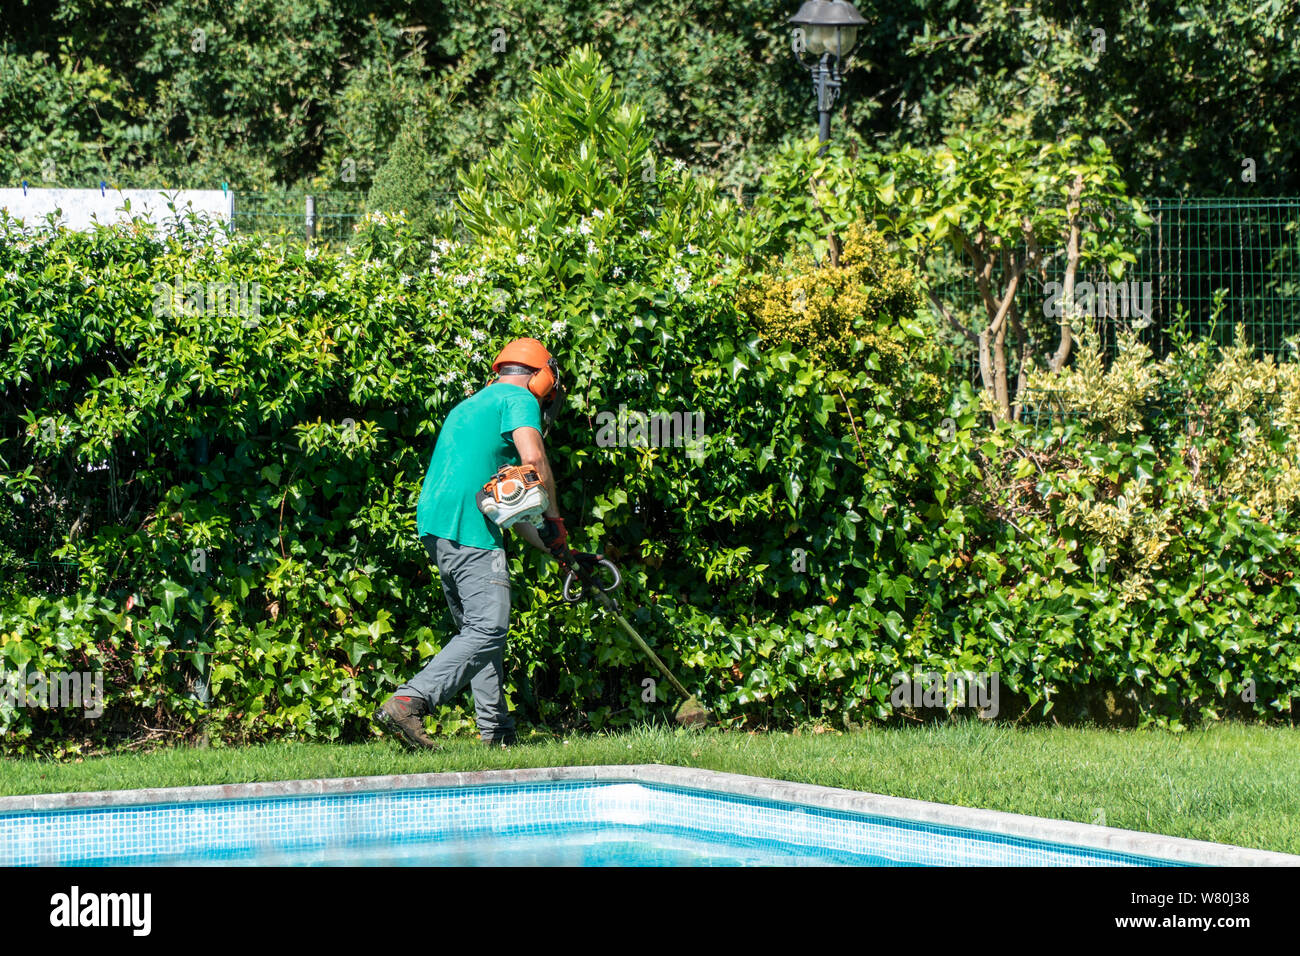 A man equipped with a brush cutter works on front yard with swimming pool. Garden maintenance concept Stock Photo